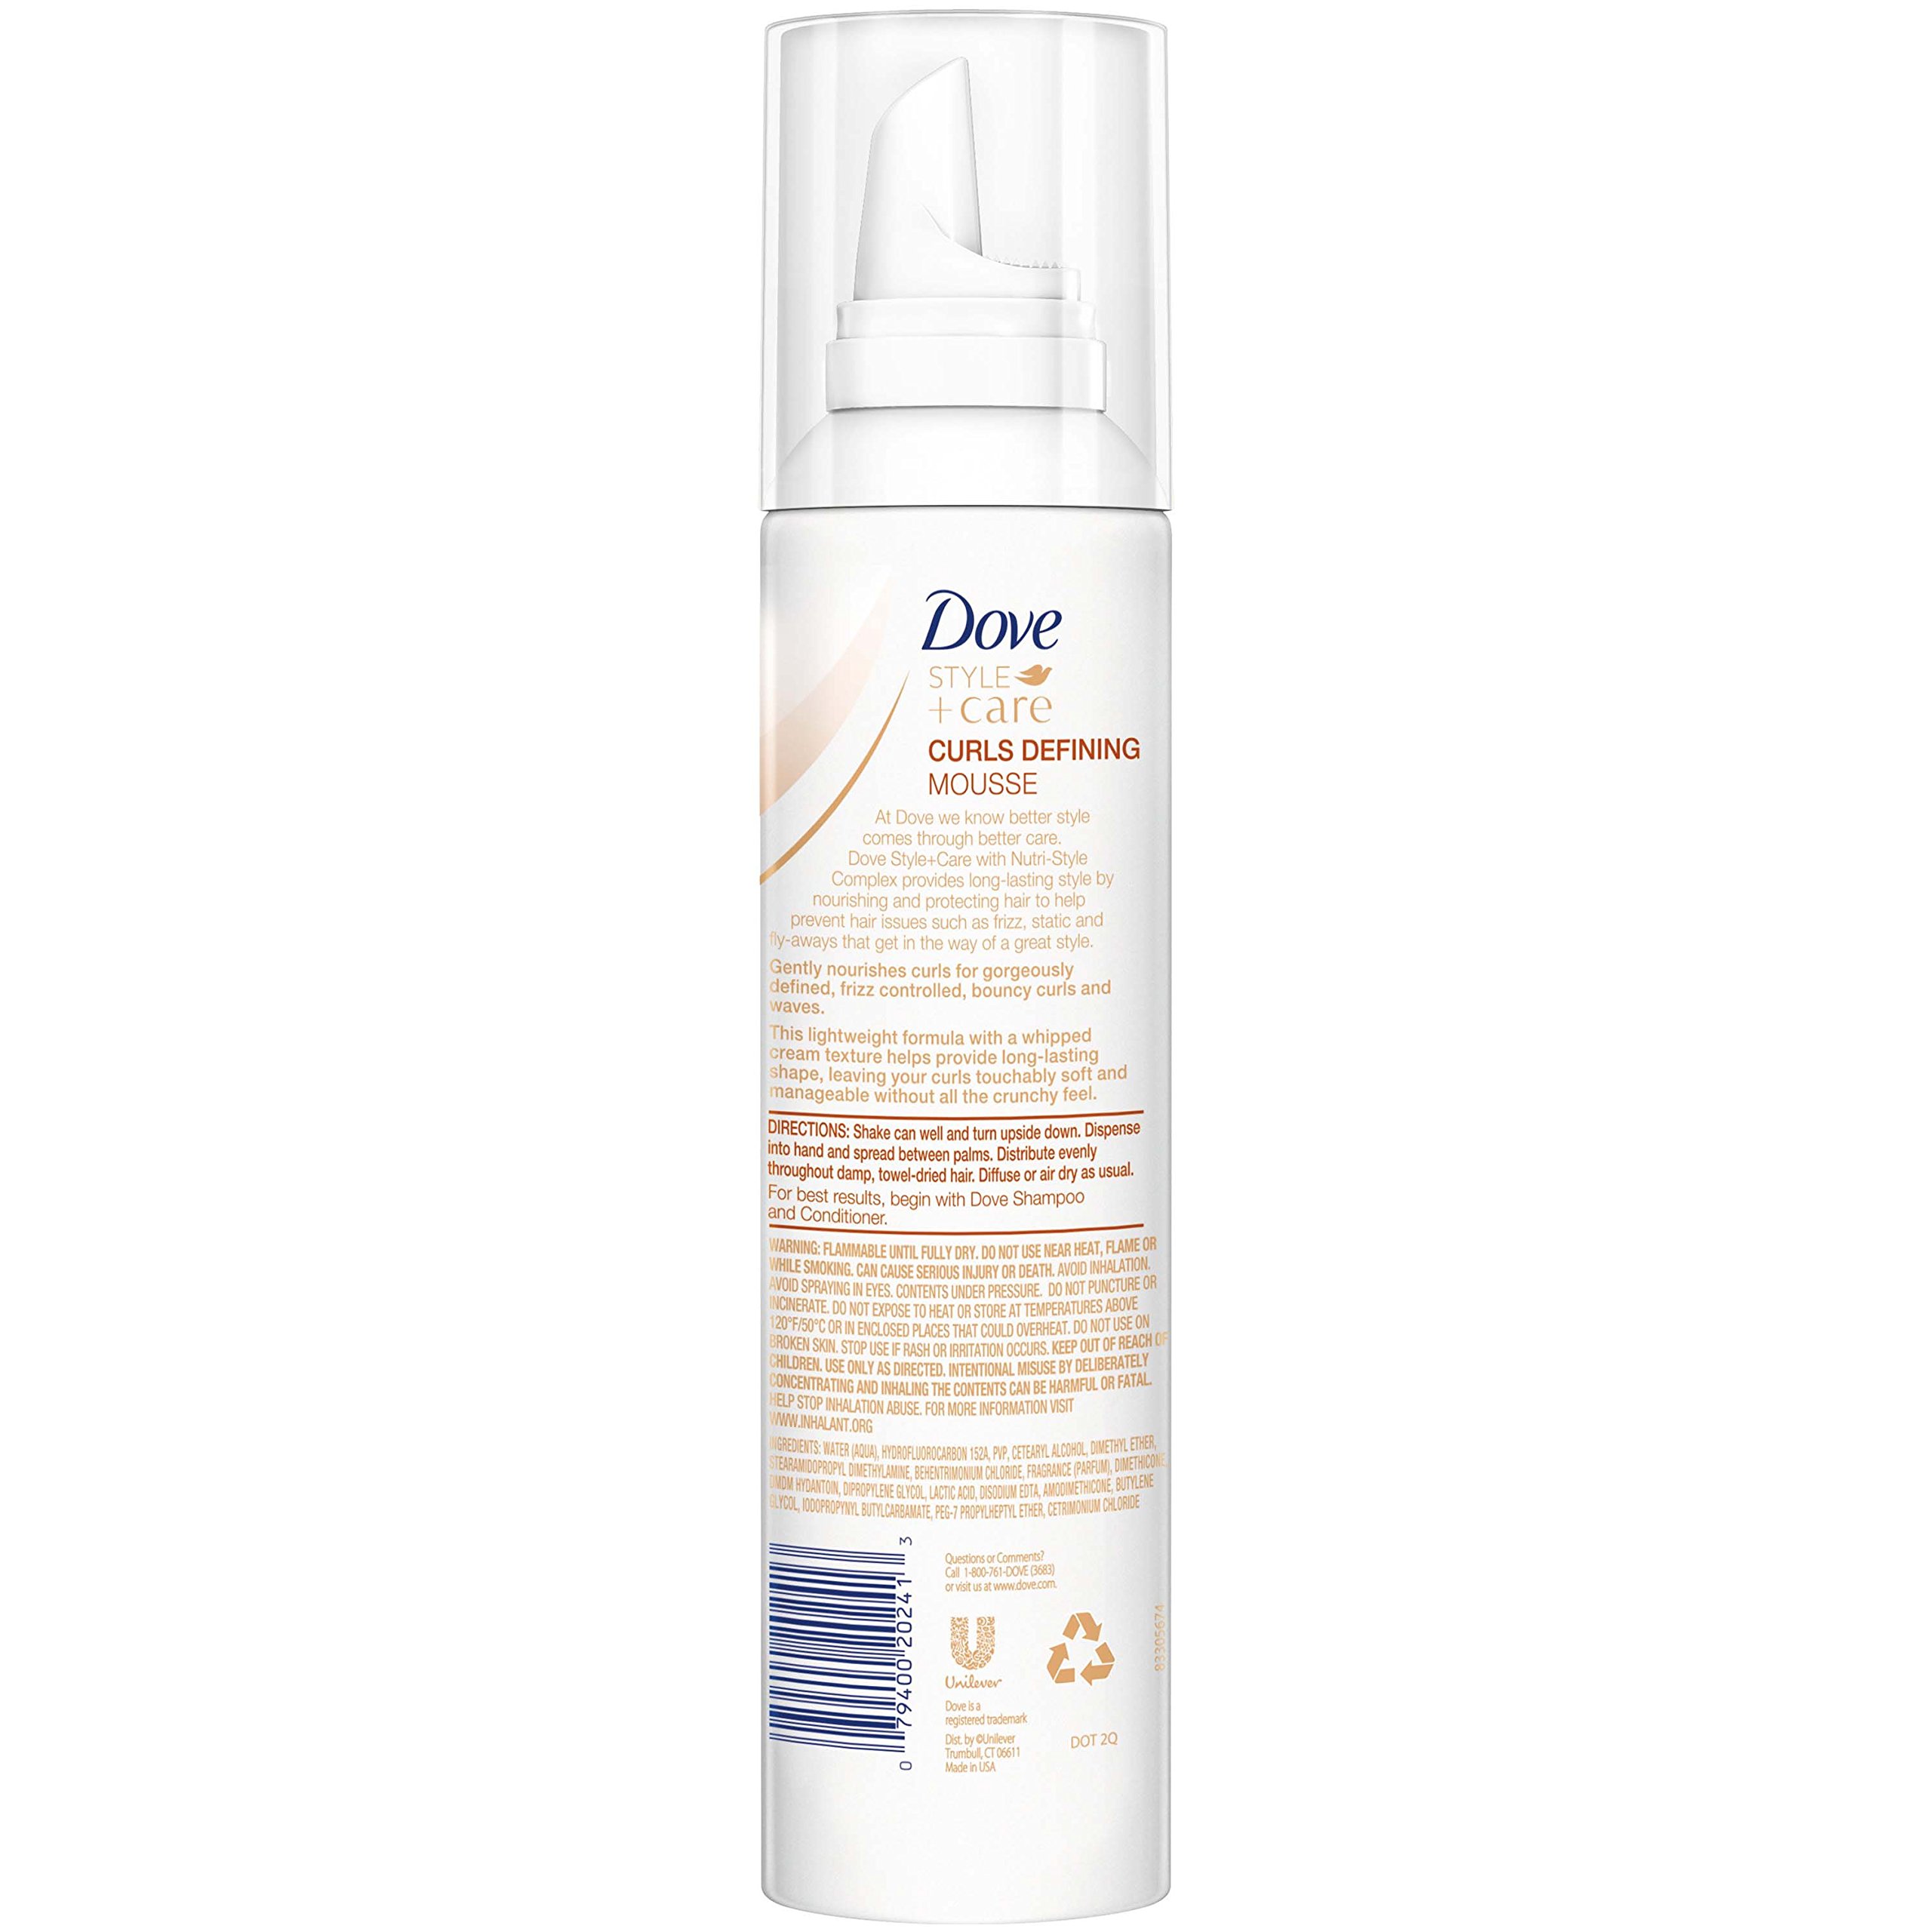 Dove STYLE+care Curls Defining Mousse, Soft Hold 7 oz